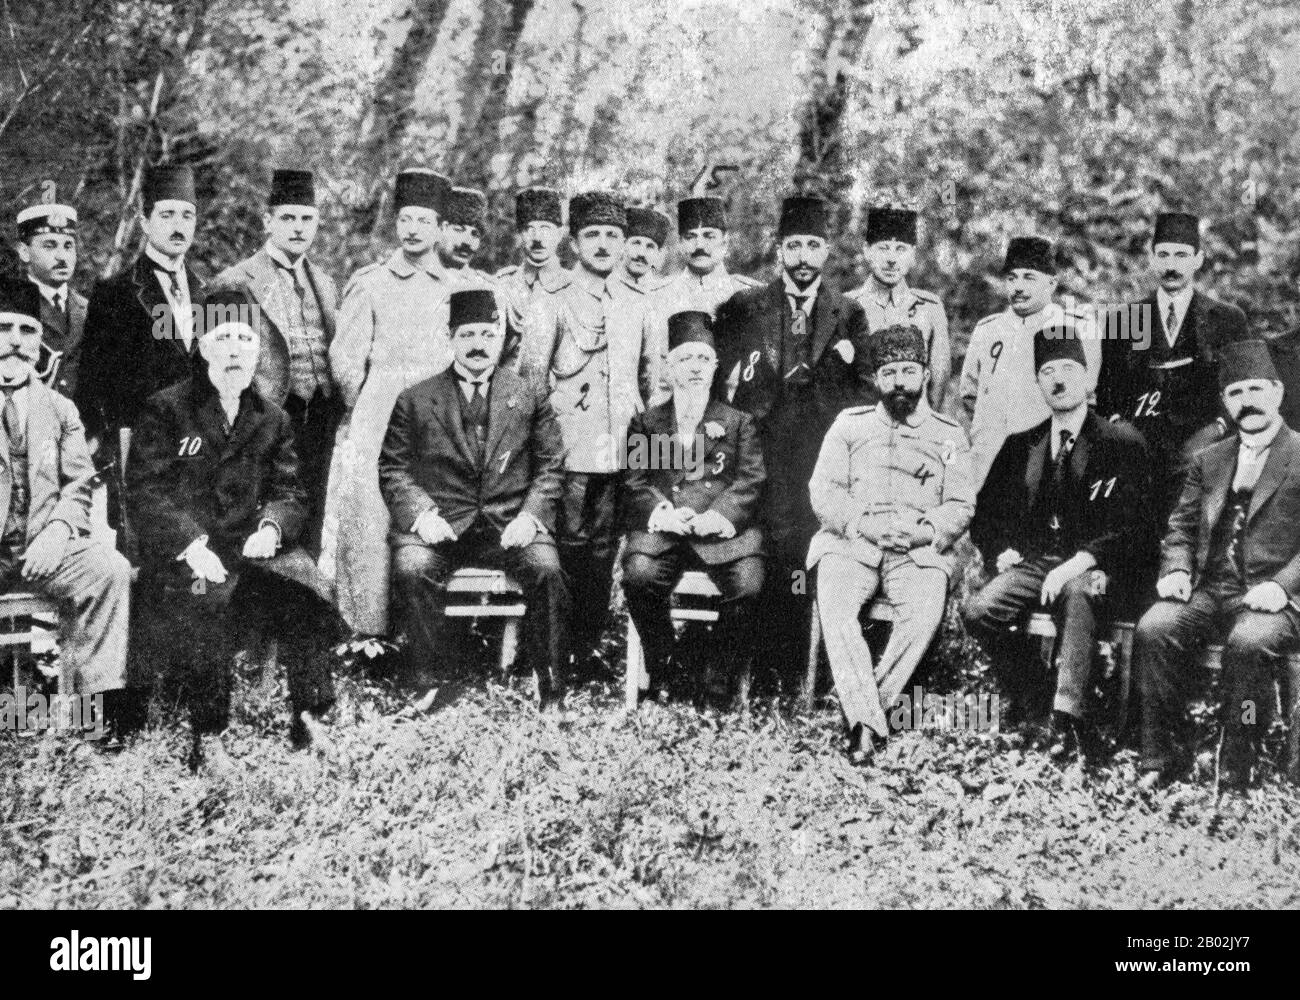 A secret meeting of The Committee of Union & Progress (Young Turkey Party) was held with the following in attendence:  Mehmed Talaat Pasha – The Minister of the Interior; Djemal Bey Pasha – Commander Secret State Police; Enver Pasha – Minister of War; Halil Bey – Foreign Minister; Mehmed Djavid – Minister of Finance; Said Halim – Grand Vizier; Alusa Mussa Kiazim - Sheik-ul-Islam of Kurdistan; Rifaat Bey- President of the Senate; Hachim Bey-Minister of Communications; Kemal Bey - Minister of Agriculture; Mustafa Kemal - Army Chief of Staff  The Purpose of this secret meeting was to arrange a to Stock Photo